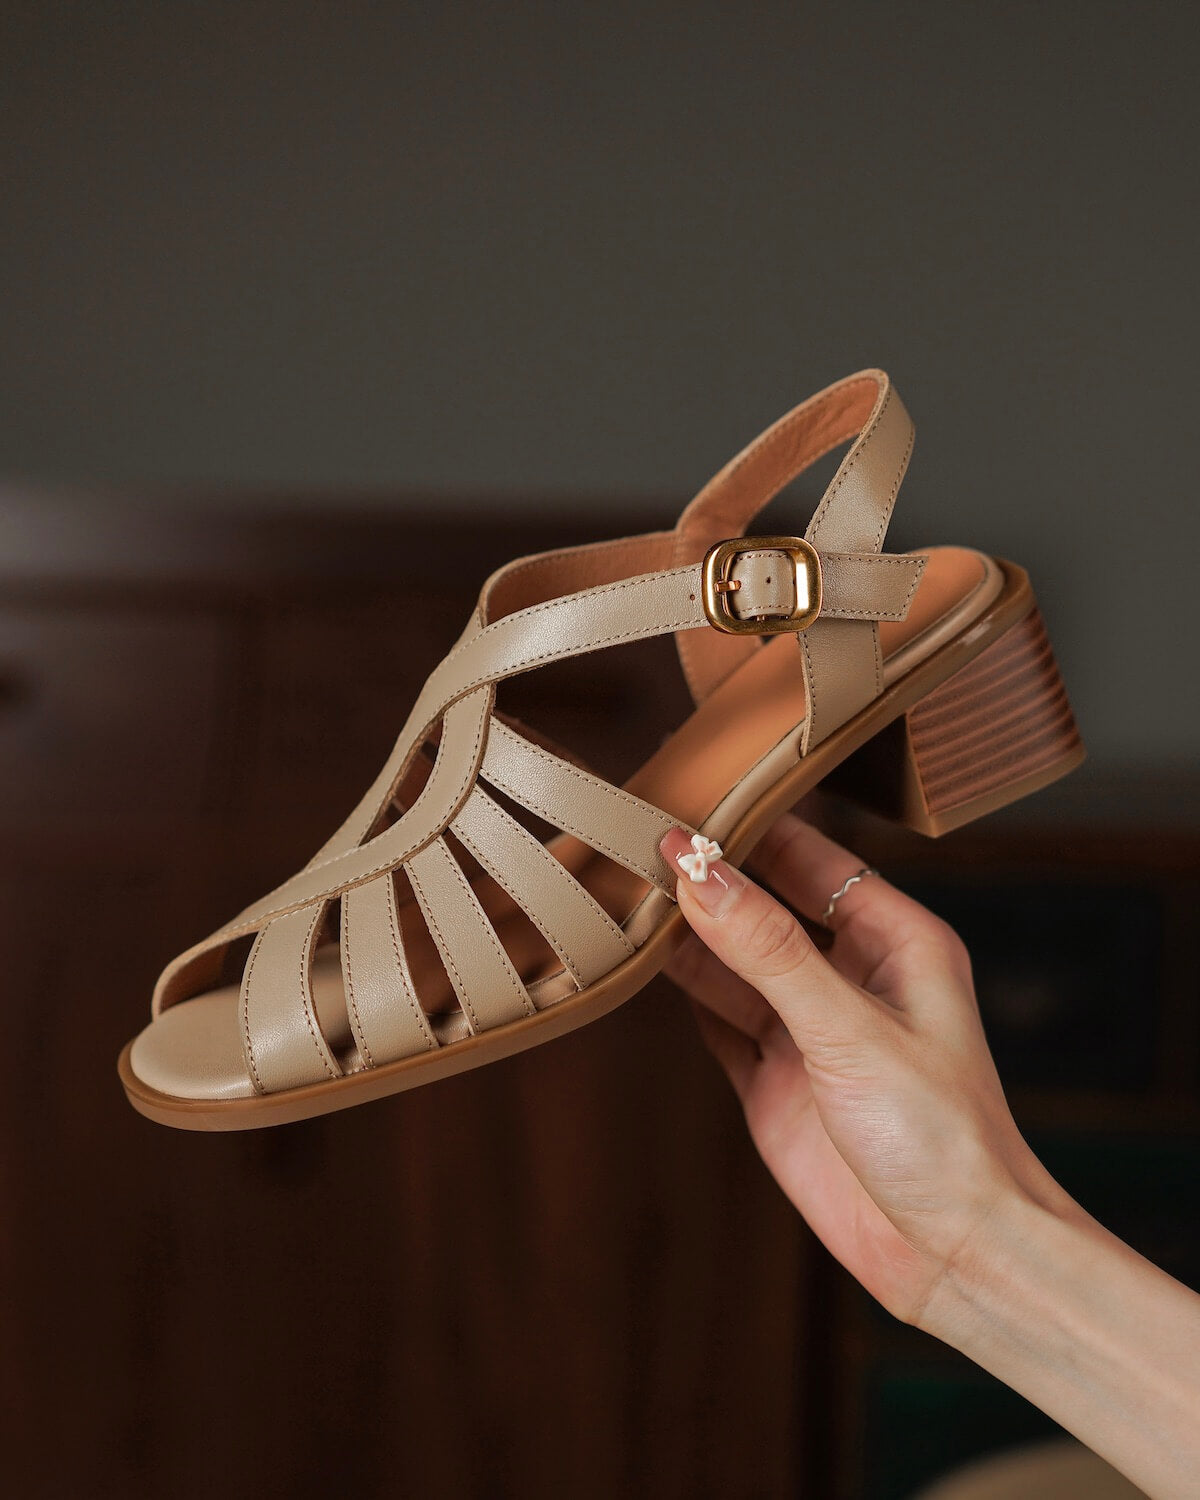 Mla-gladiator-leather-sandals-in-nude-1